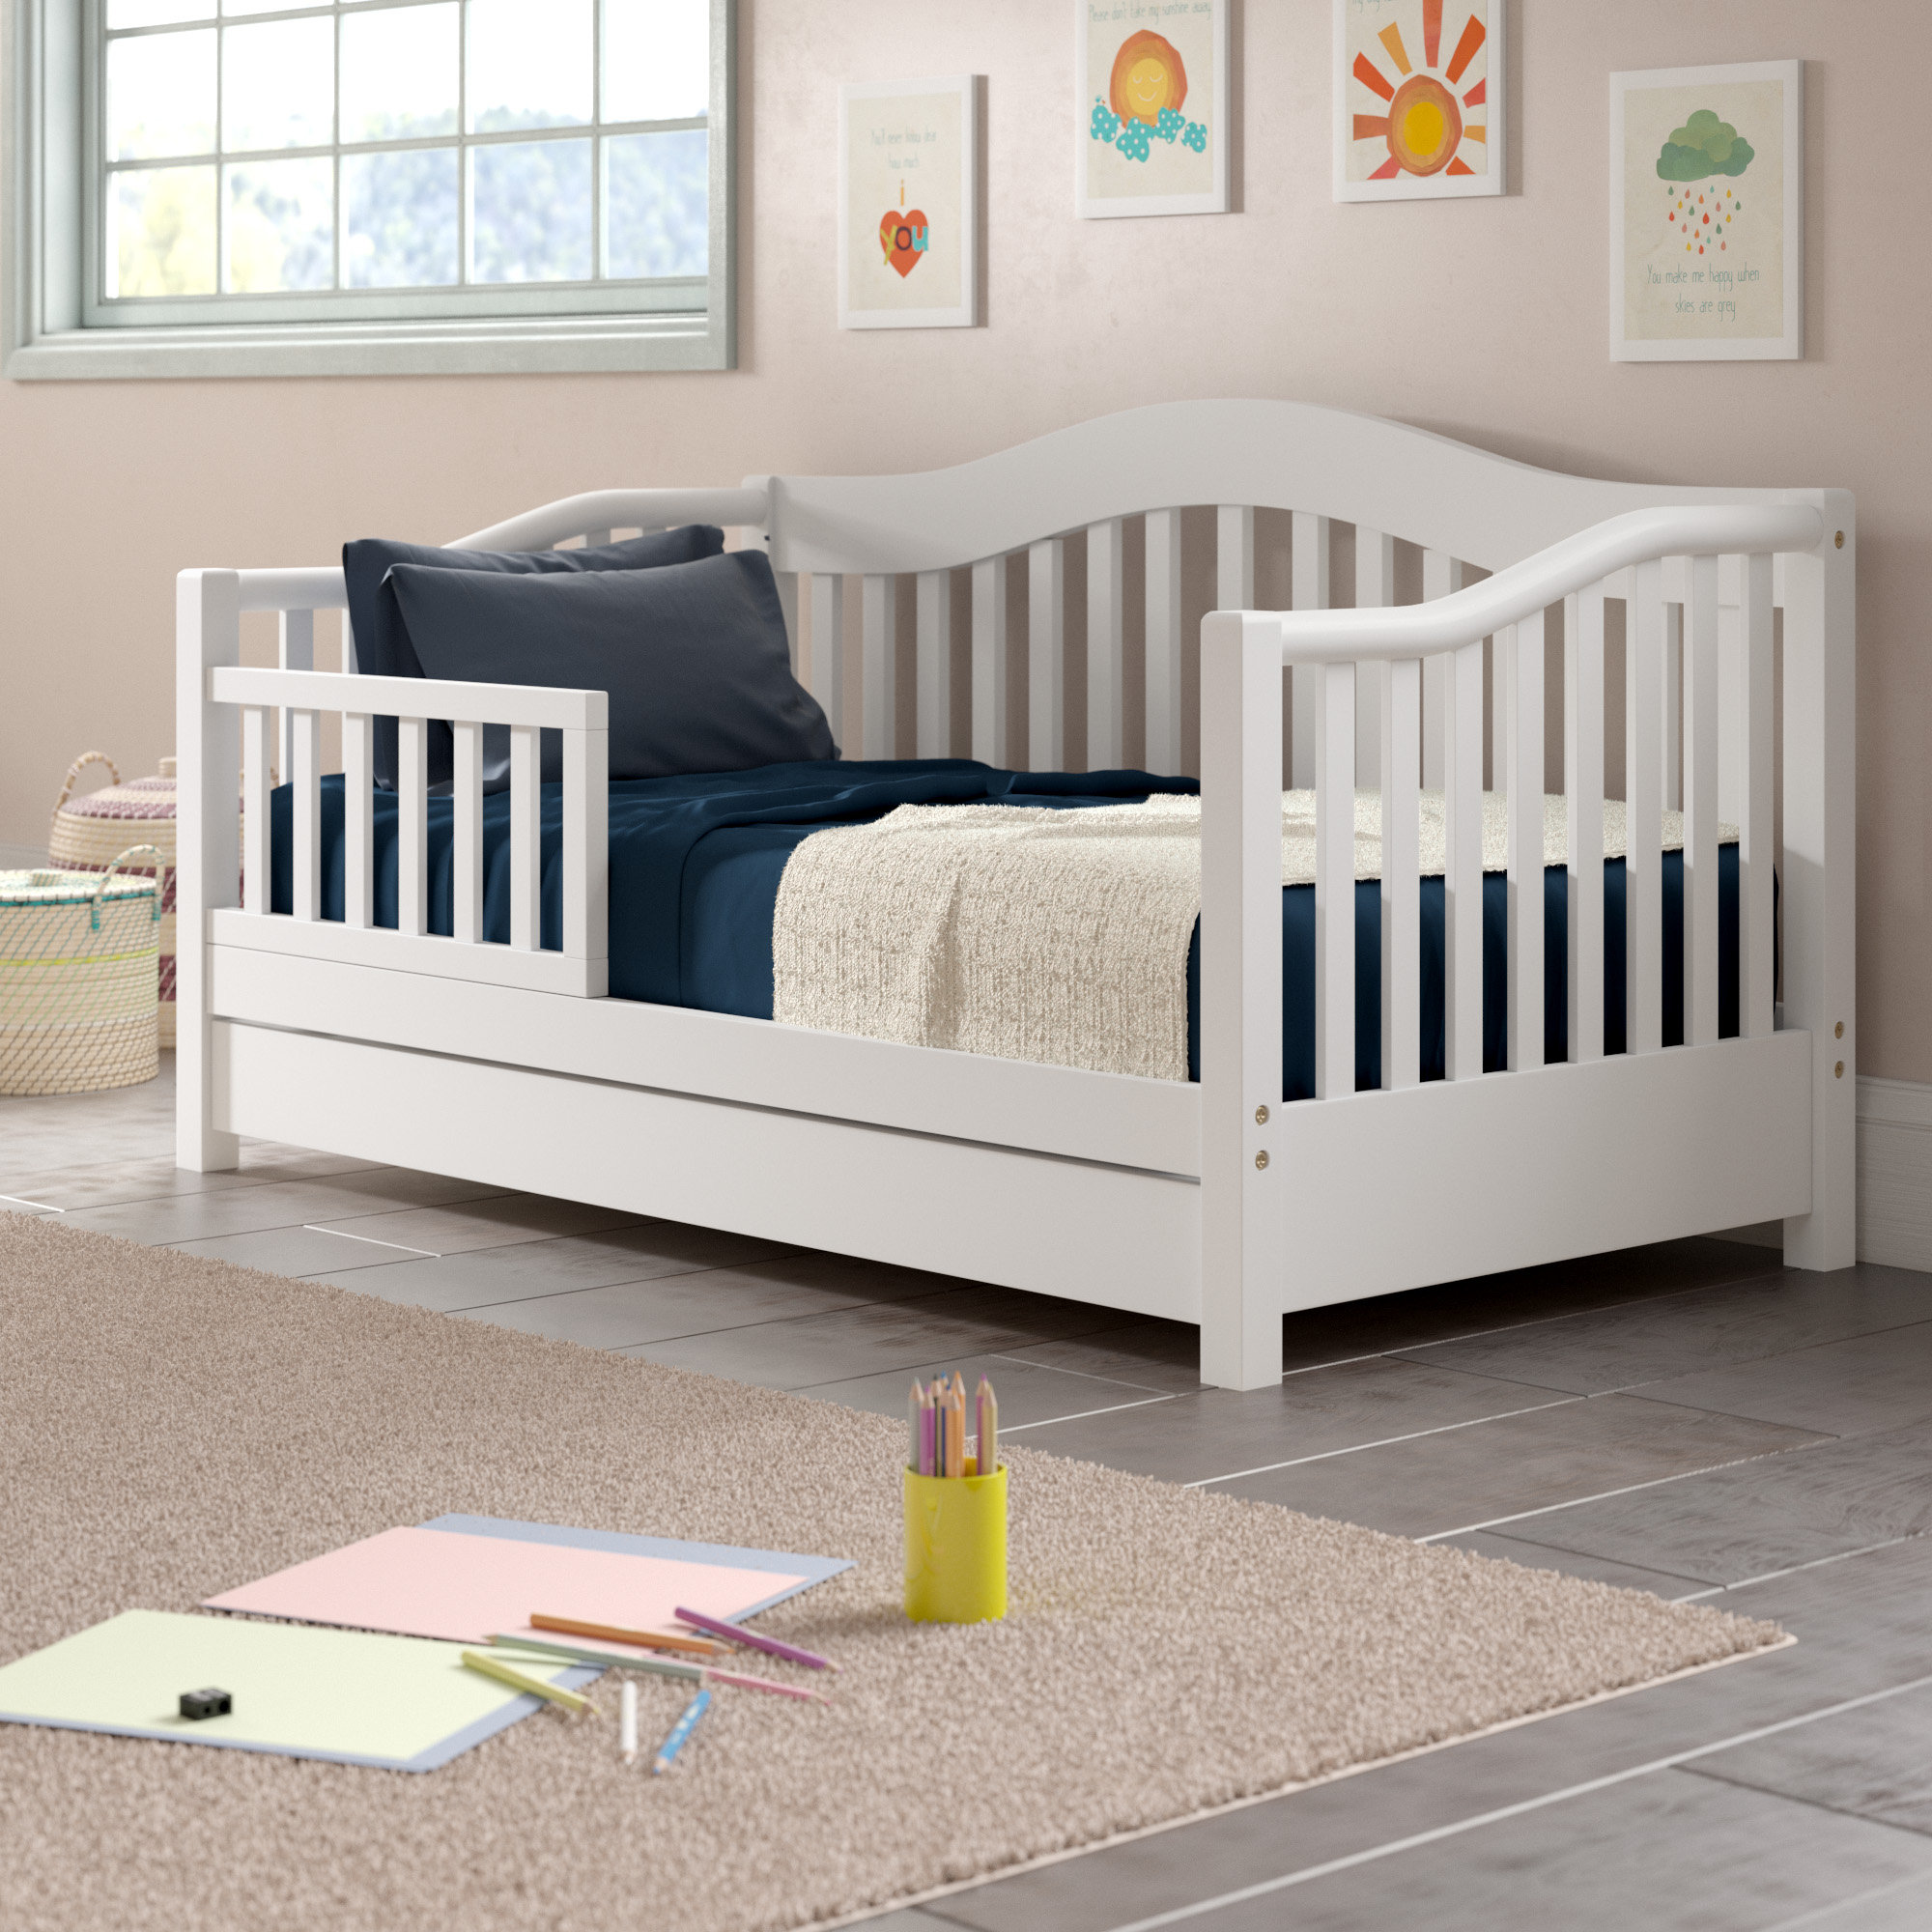 beds for toddlers